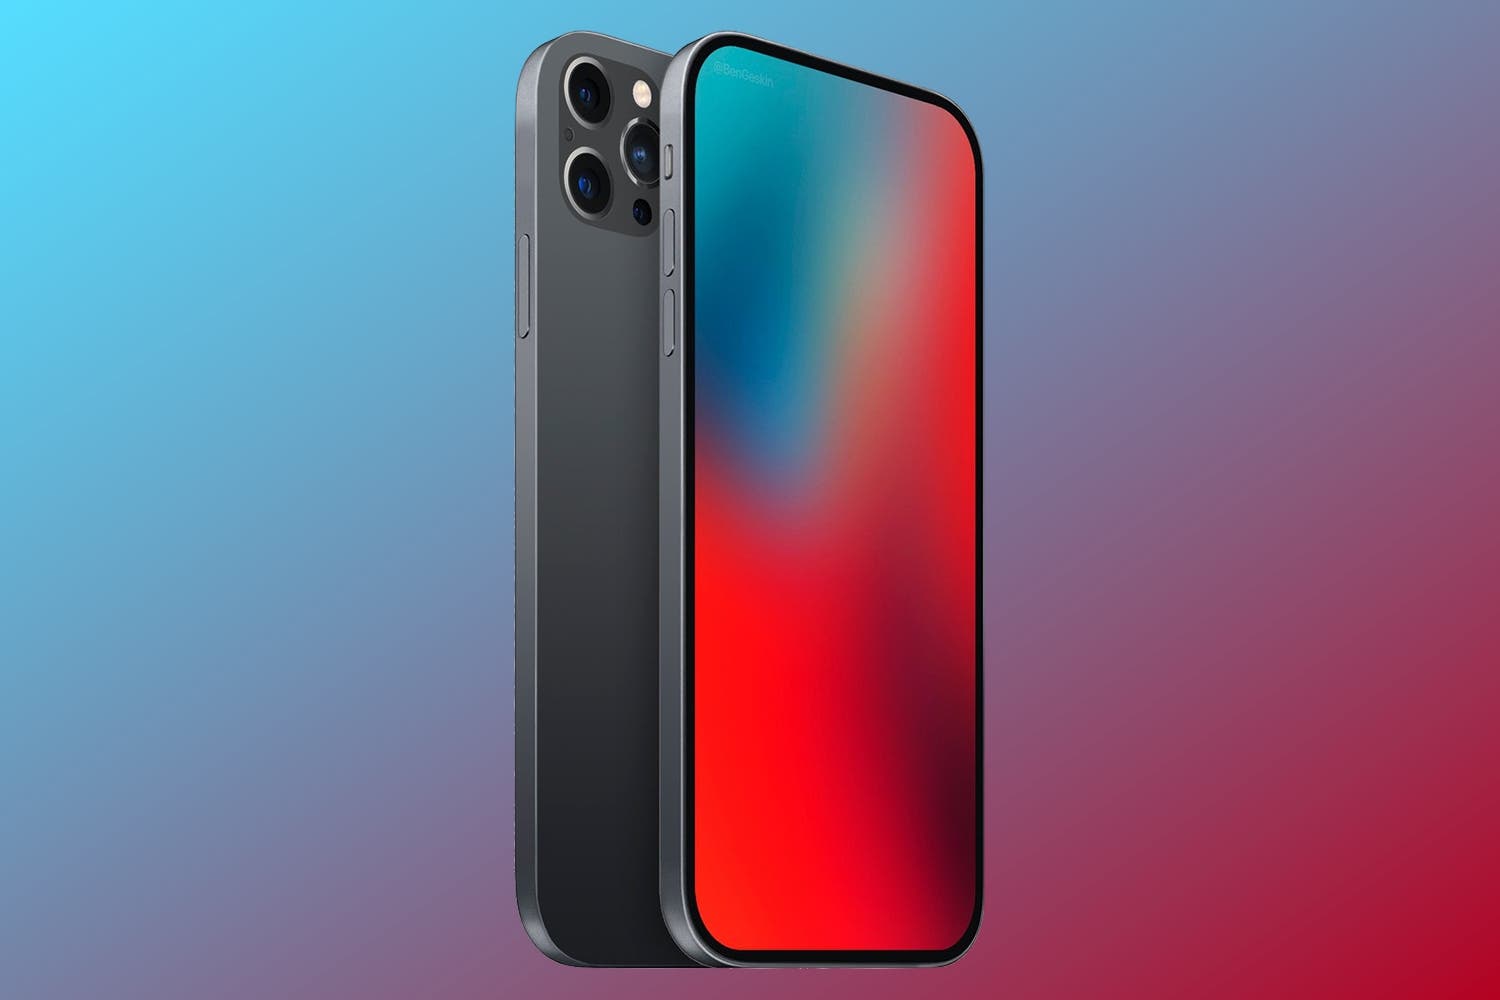 Iphone 12 Series To Cross 100 Million Shipments Mark In 2020